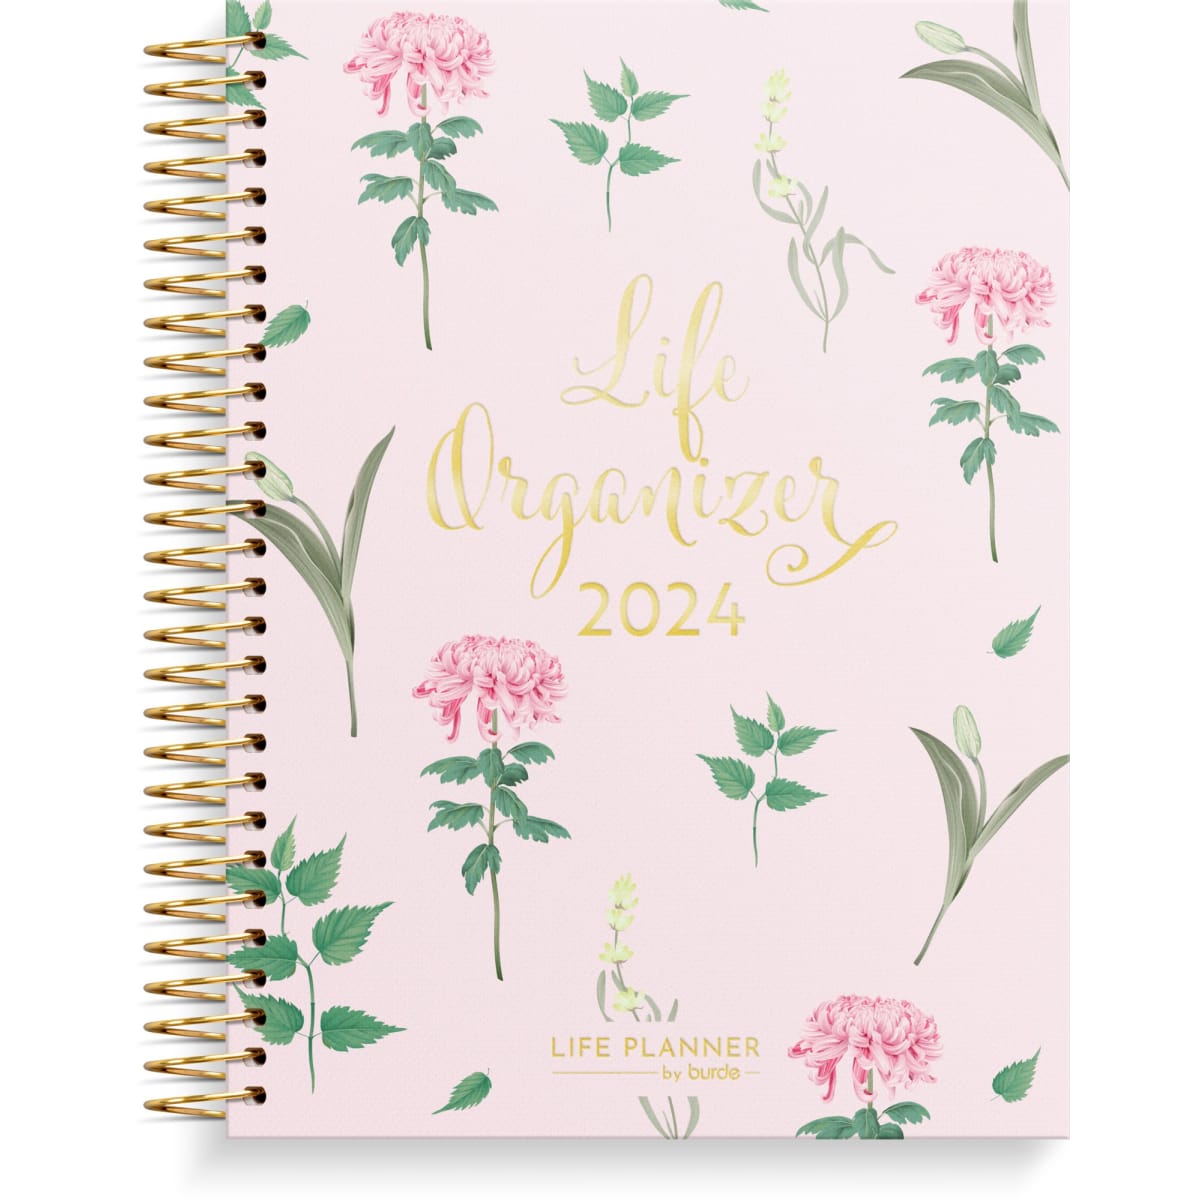 Burde Planner 2024 | Daily & Weekly Planner | Life Planner To Do | Elastic  Band Closure, Hardcover | Planner 2024 | Organized living | December 18